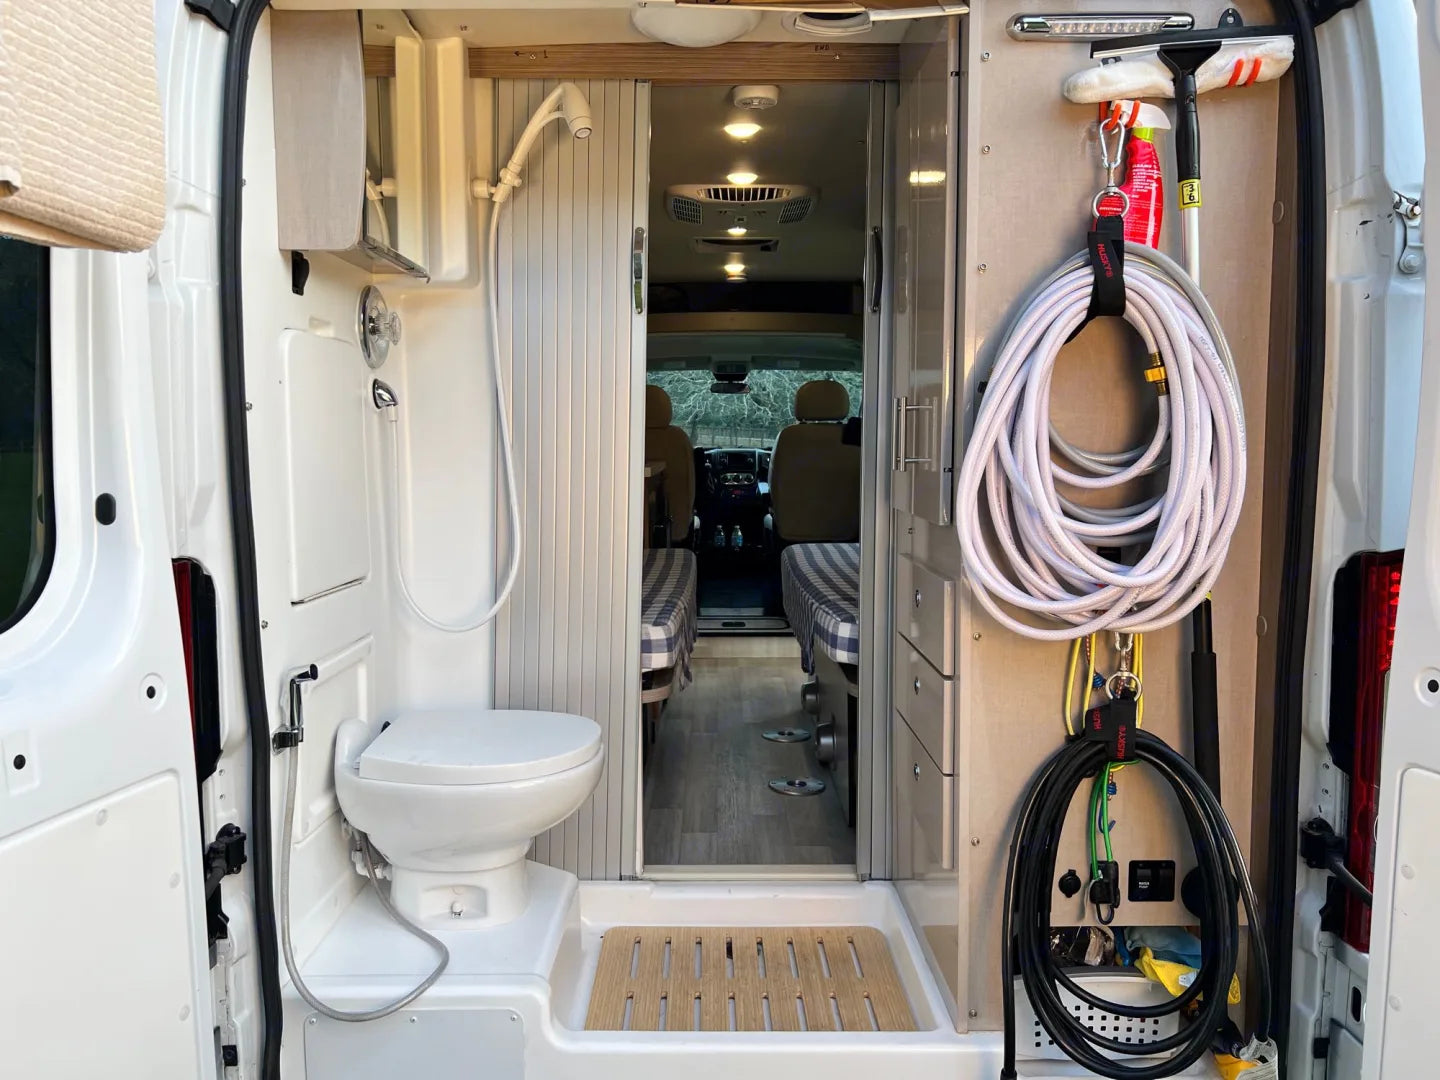  The back view of a camper van showing a compact and efficient layout with a white toilet, shower area, wooden flooring, and storage space including hoses and an extinguisher, with the interior living space visible in the distance.